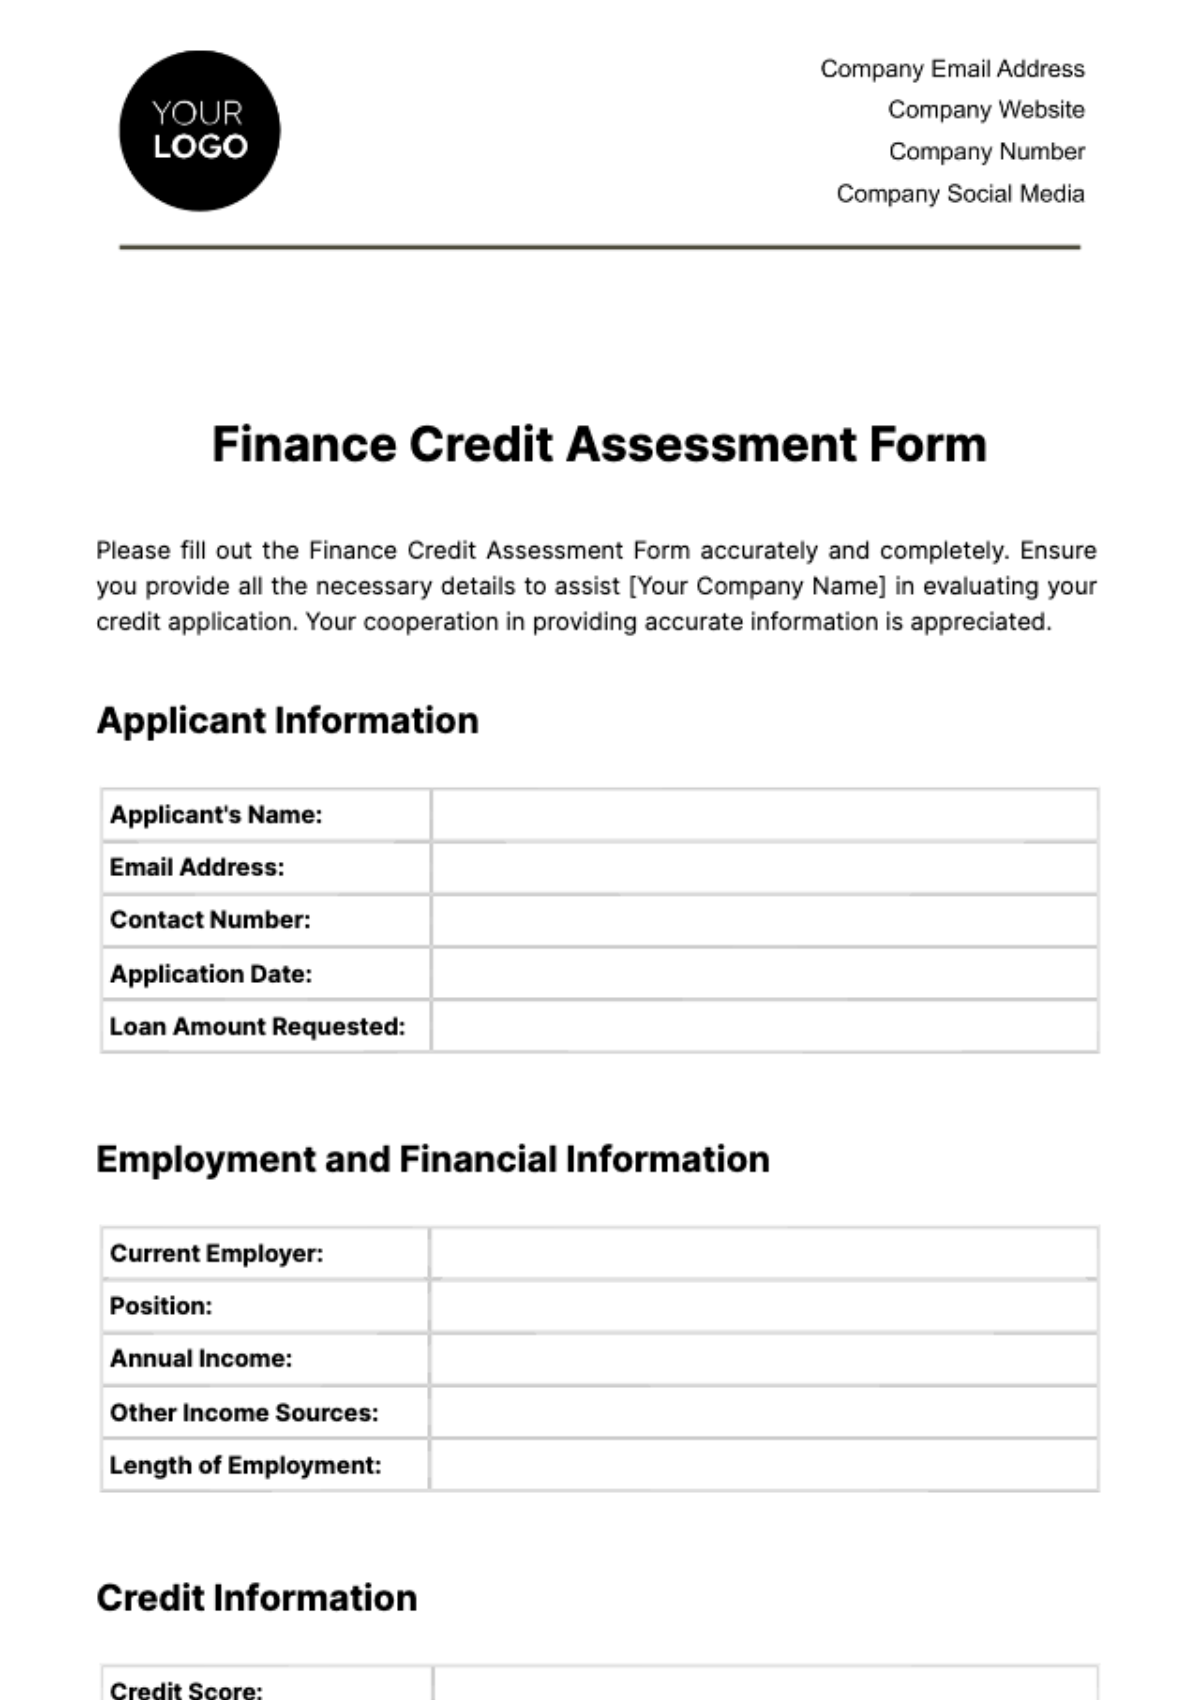 Free Finance Credit Assessment Form Template